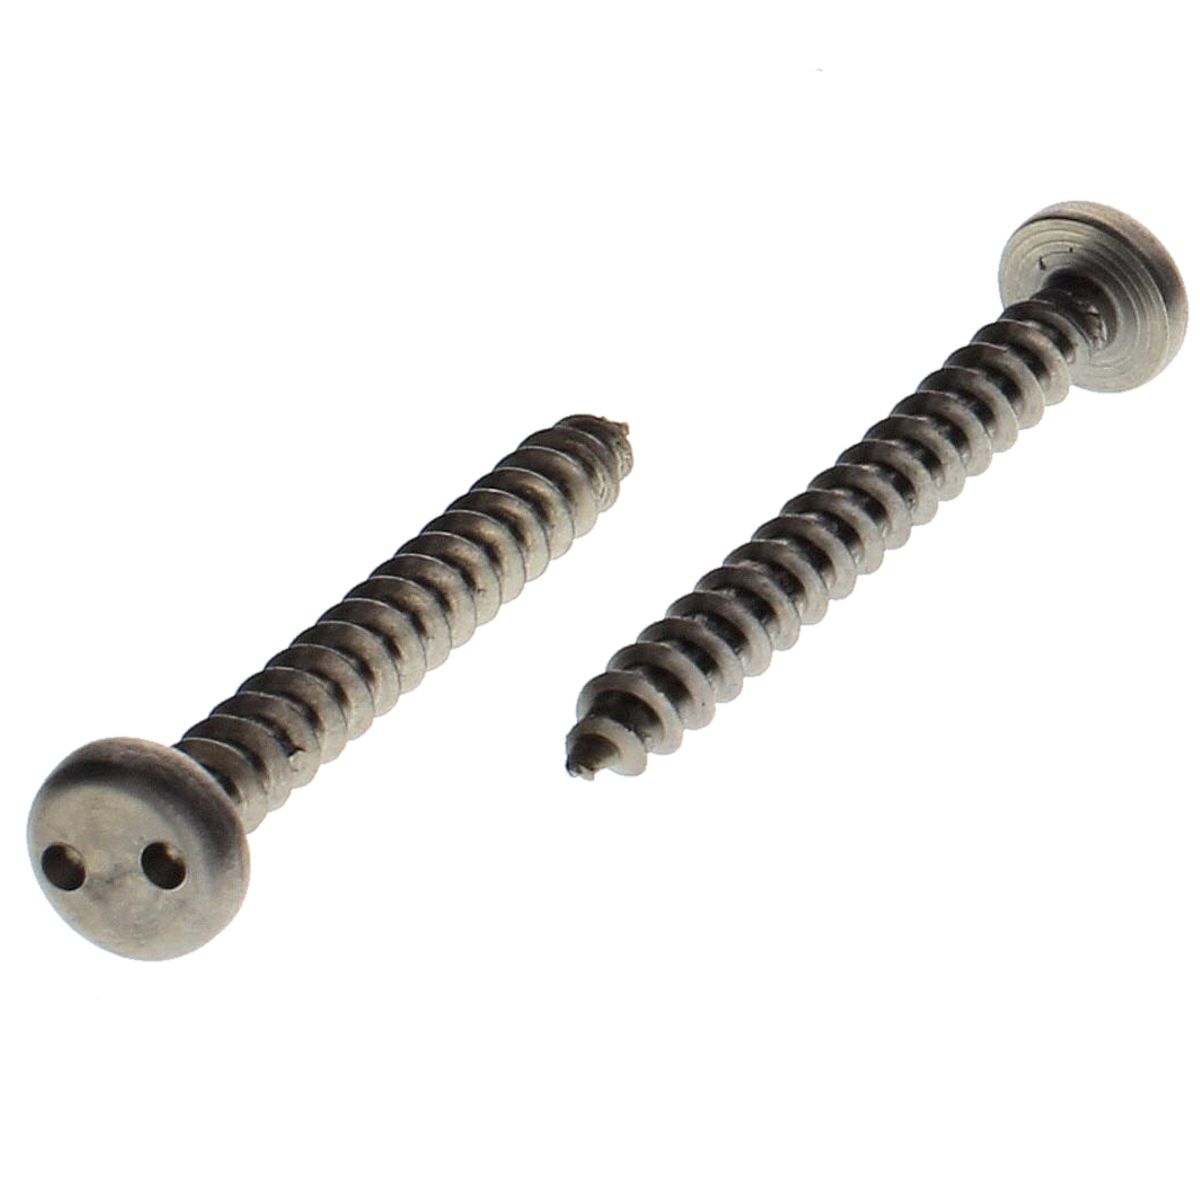 #8 x 1-1/2" Pan Head Spanner Security Tapping Screws — 18-8 Stainless Steel, 100/PKG